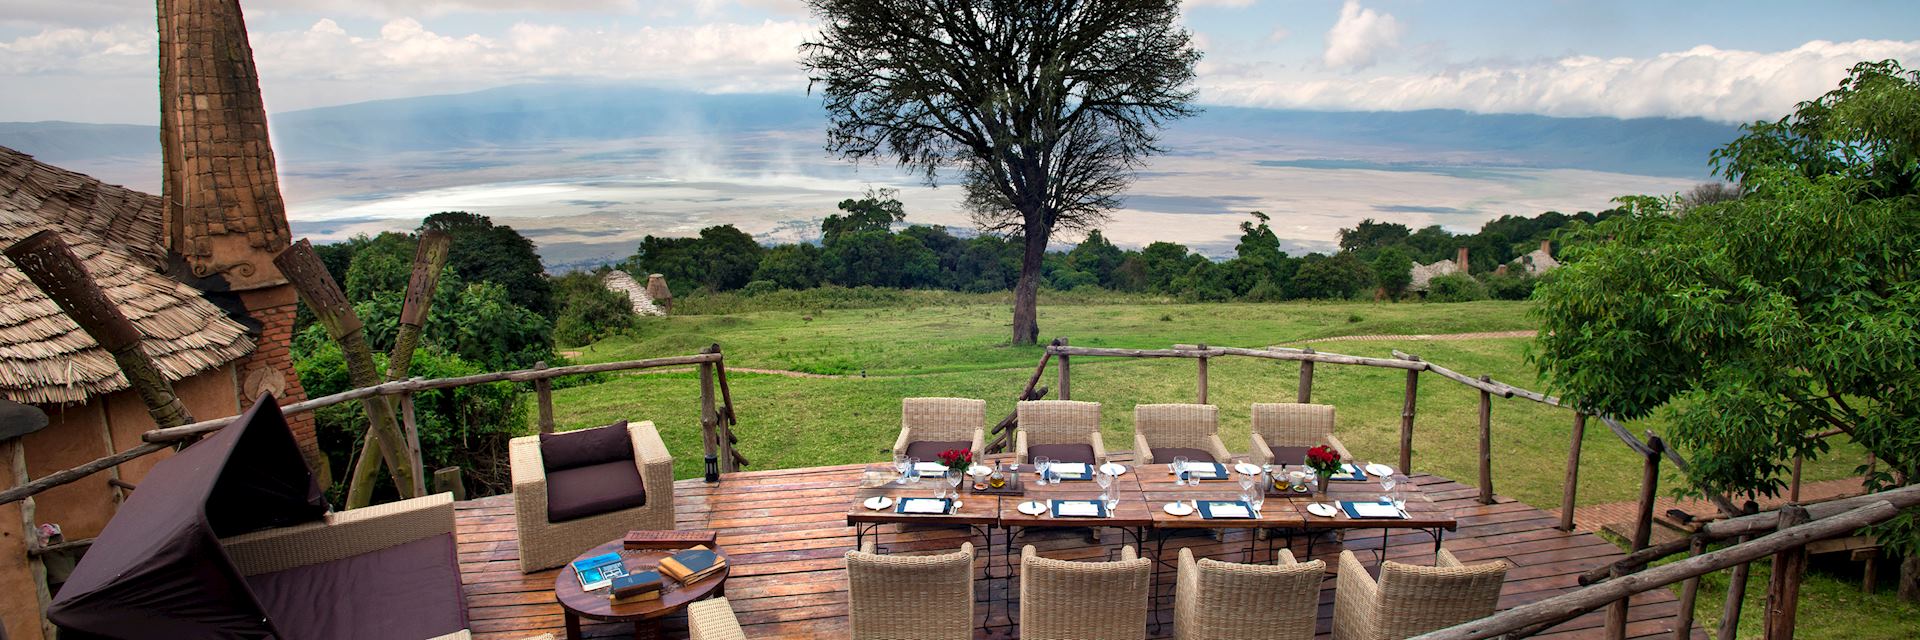 View from Ngorongoro Crater Lodge